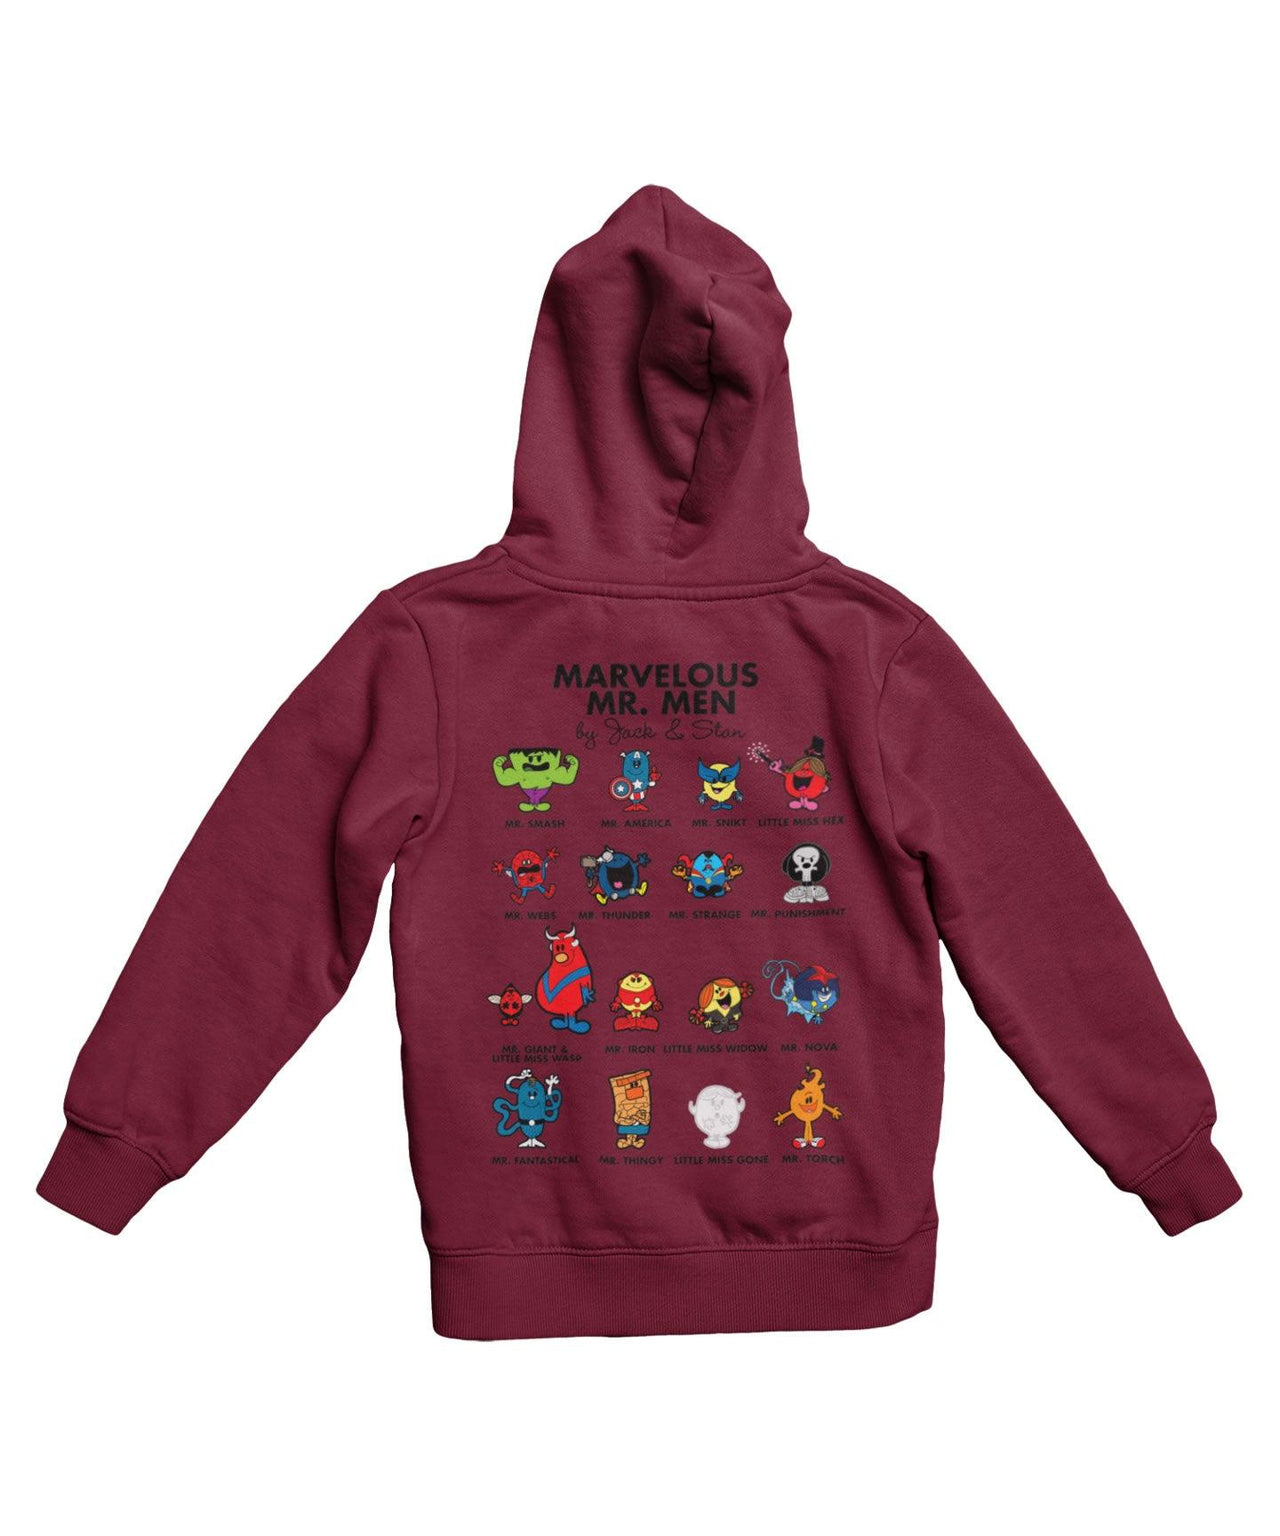 Top Notchy Marvelous Mr Men Back Printed Graphic Hoodie 8Ball